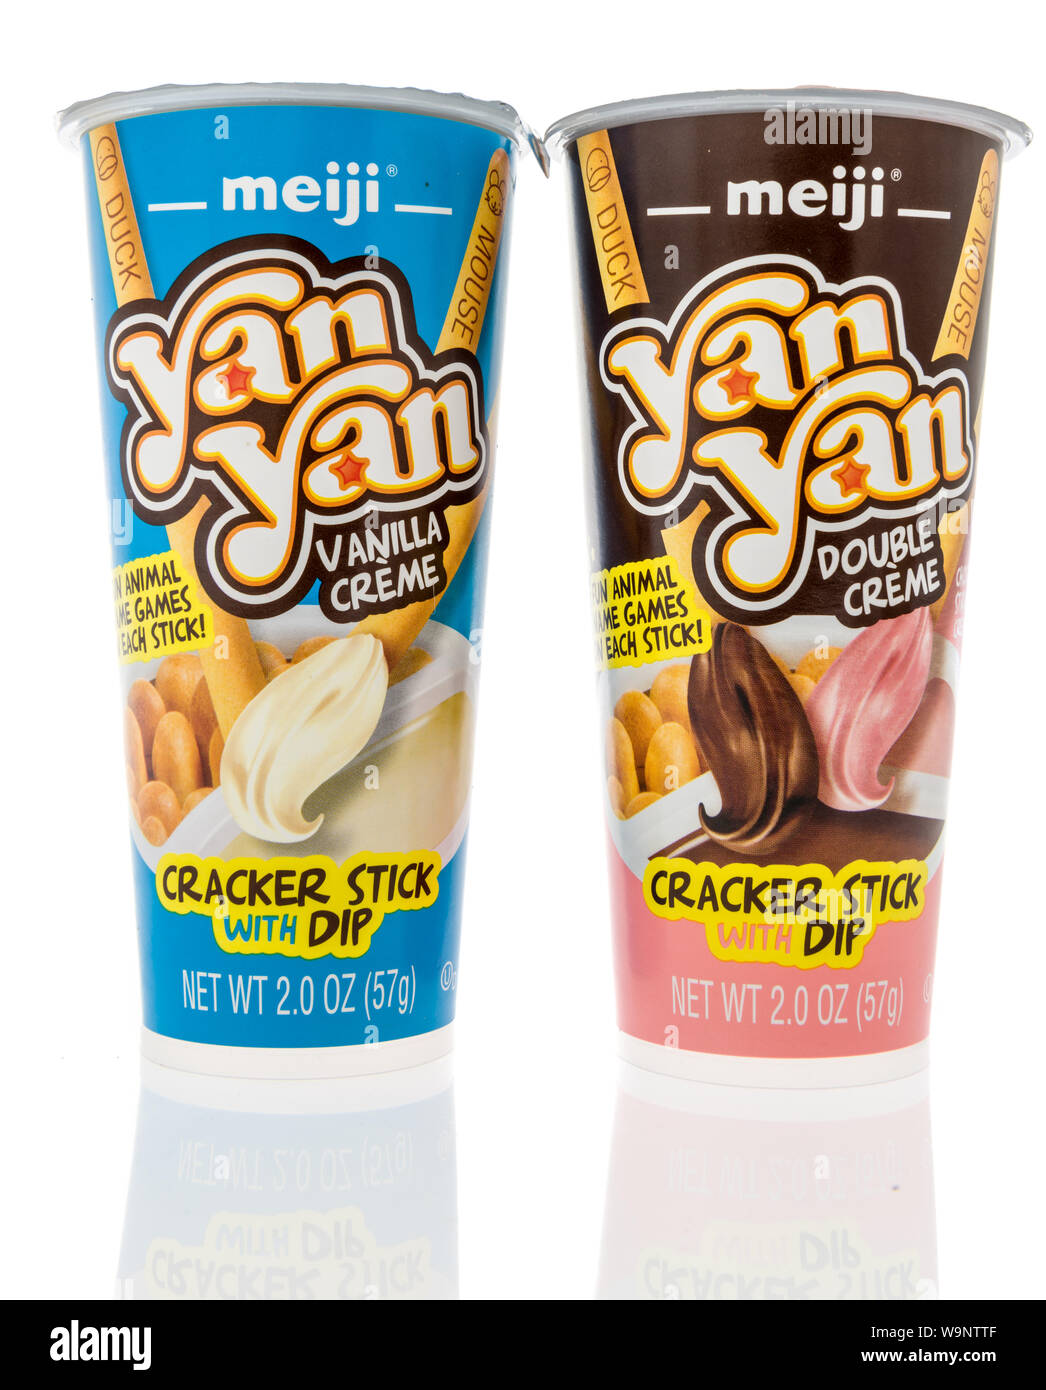 Winneconne, WI - 12 August 2019 : A package of Meiji yan yan cracker stick  with dip vanilla and double cream on an isolated background Stock Photo -  Alamy